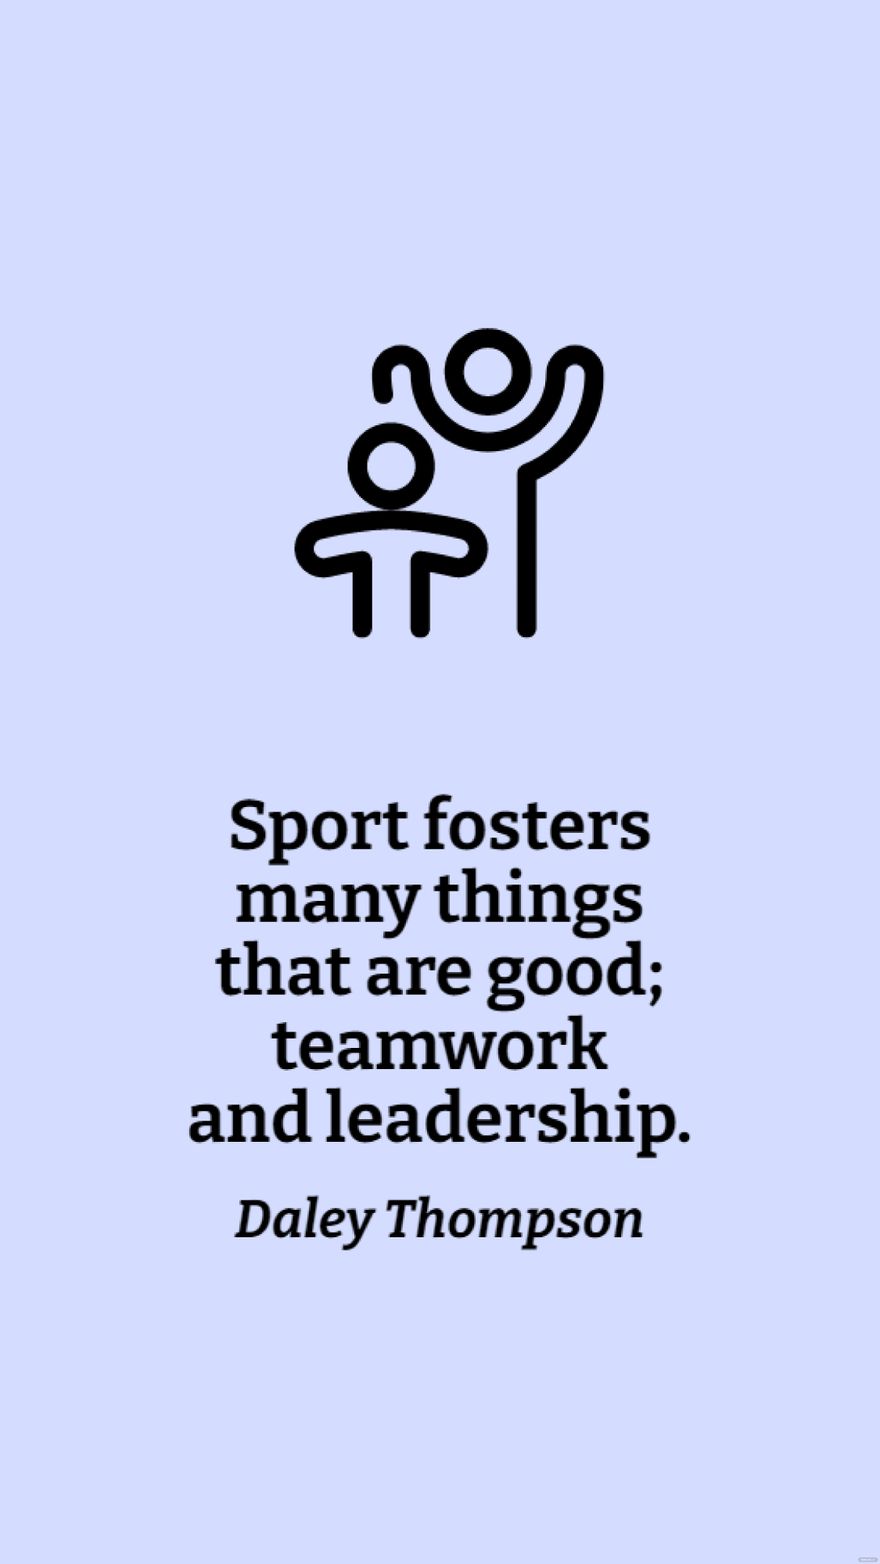 Free Daley Thompson - Sport fosters many things that are good; teamwork and leadership.